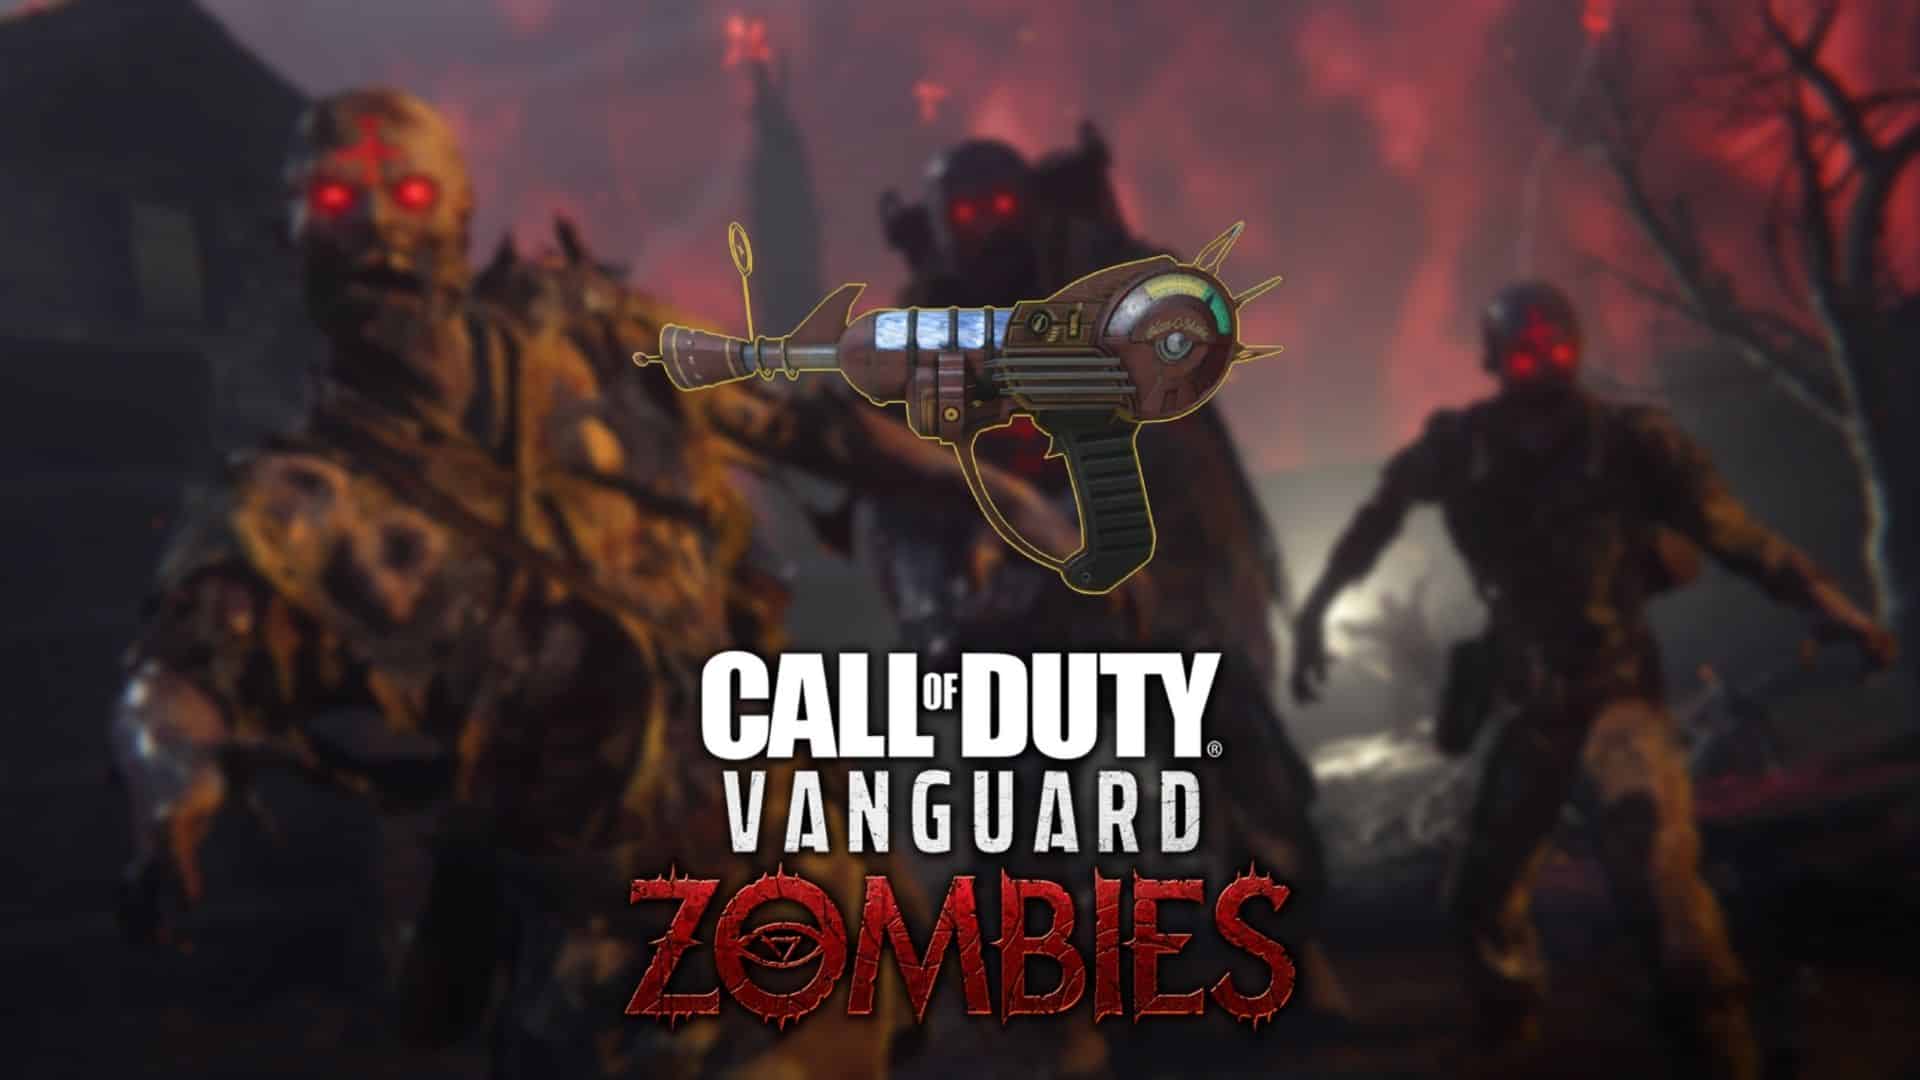 Call Of Duty: 'Vanguard' Has 'Press F To Pay Respects' Easter Egg